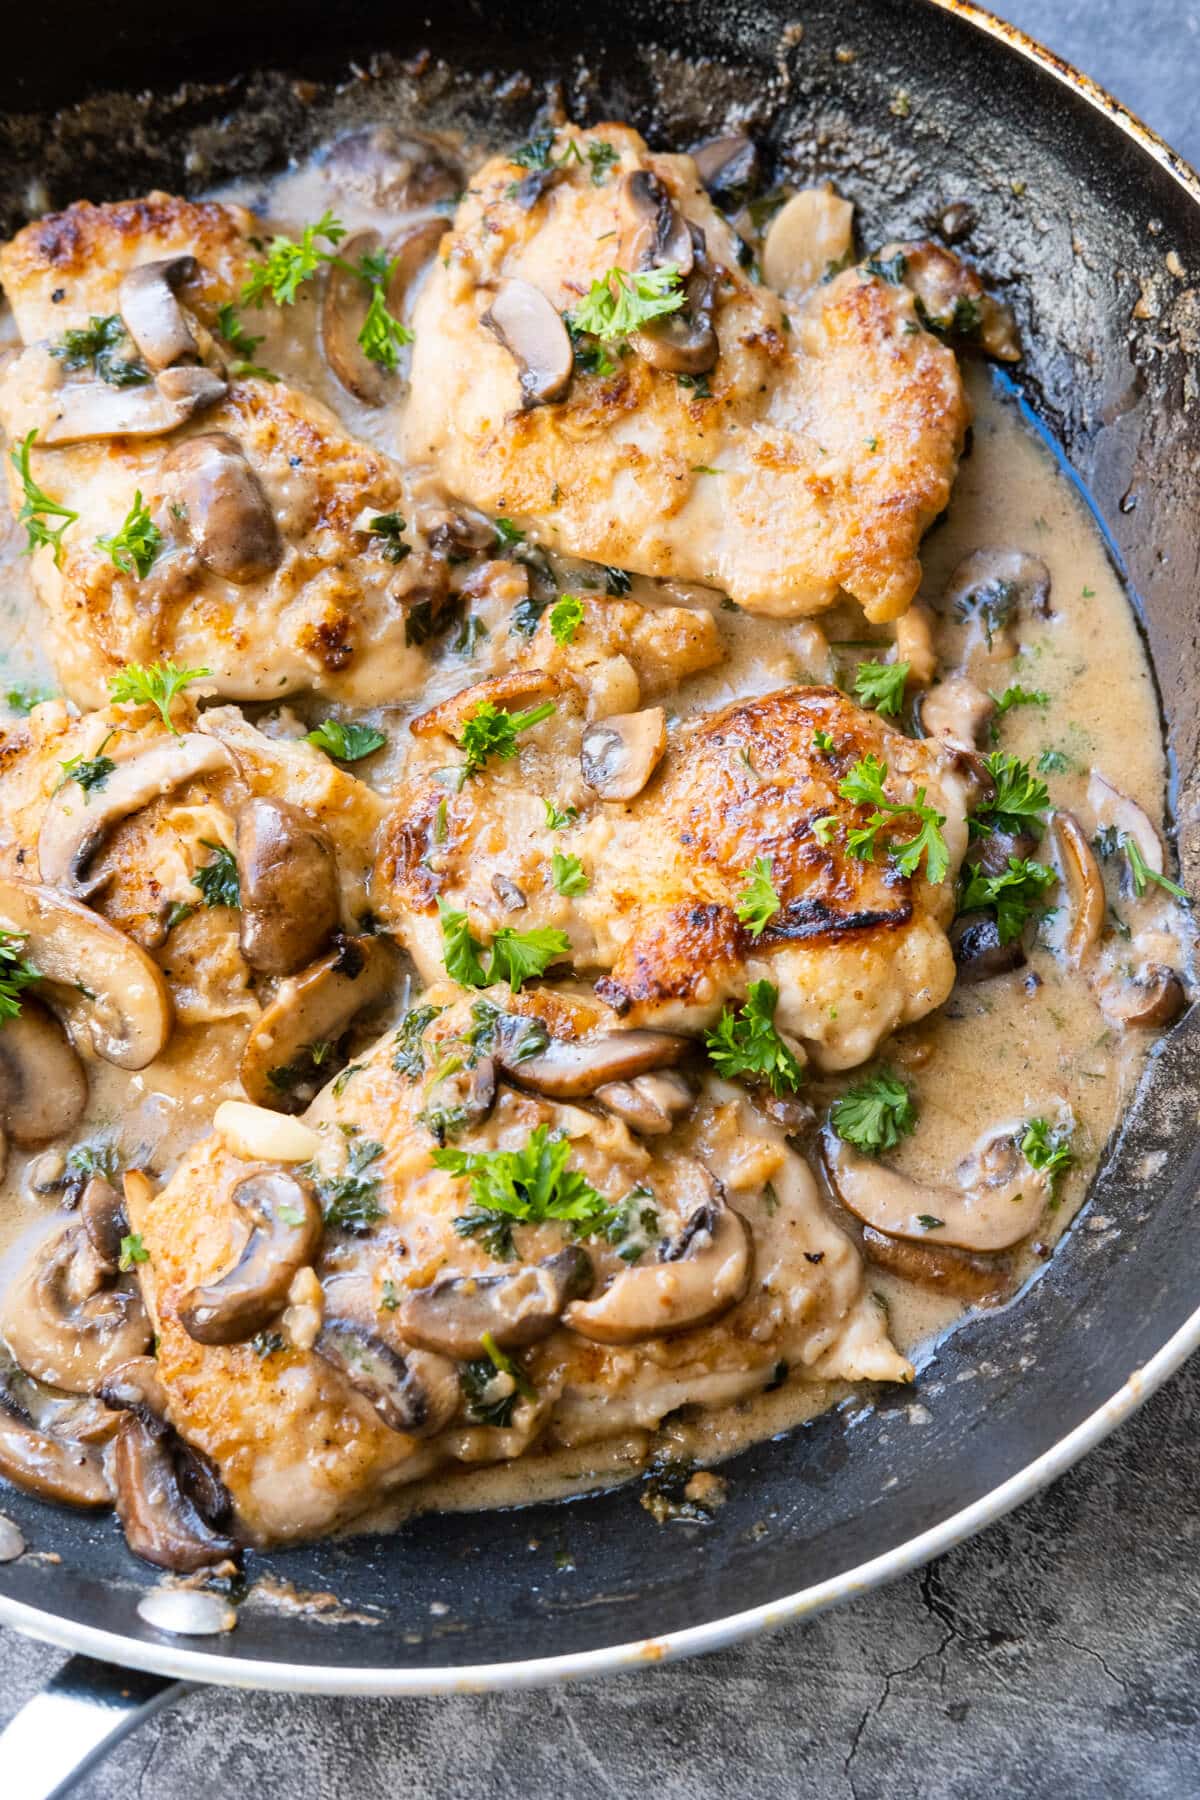 Golden-brown seared chicken pieces and mushrooms soaked in flavorful Marsala wine sauce in a skillet. 